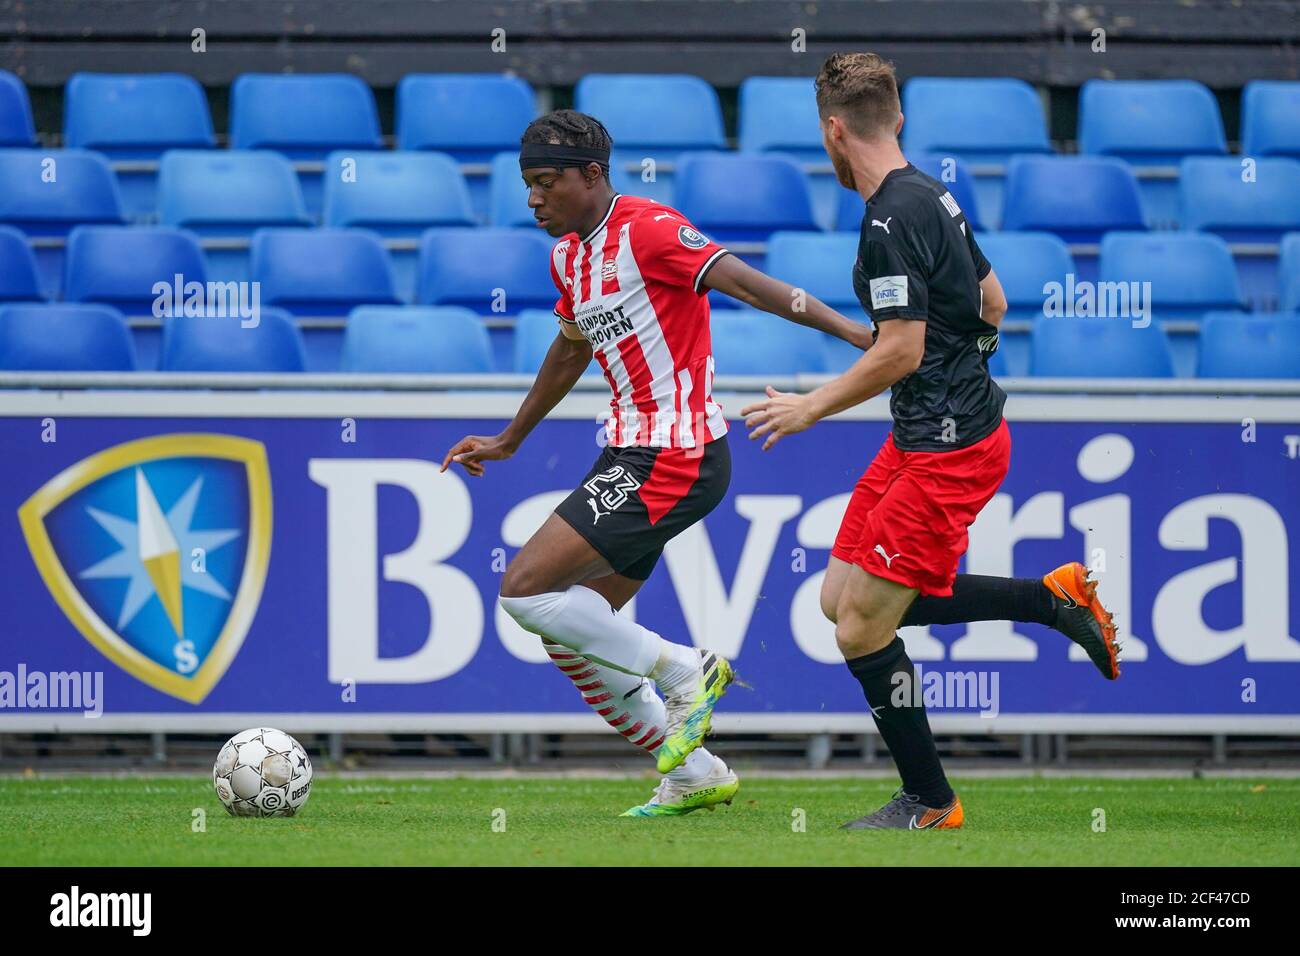 EINDHOVEN, NETHERLANDS - SEPTEMBER 3: Noni Madueke of PSV and Sead Hajrovic of Victoria Koln during the pre season friendly match between PSV and Viktoria Koln on September 3, 2020 in Eindhoven, The Netherlands.  *** Local Caption *** Noni Madueke and Sead Hajrovic of Victoria Koln Stock Photo